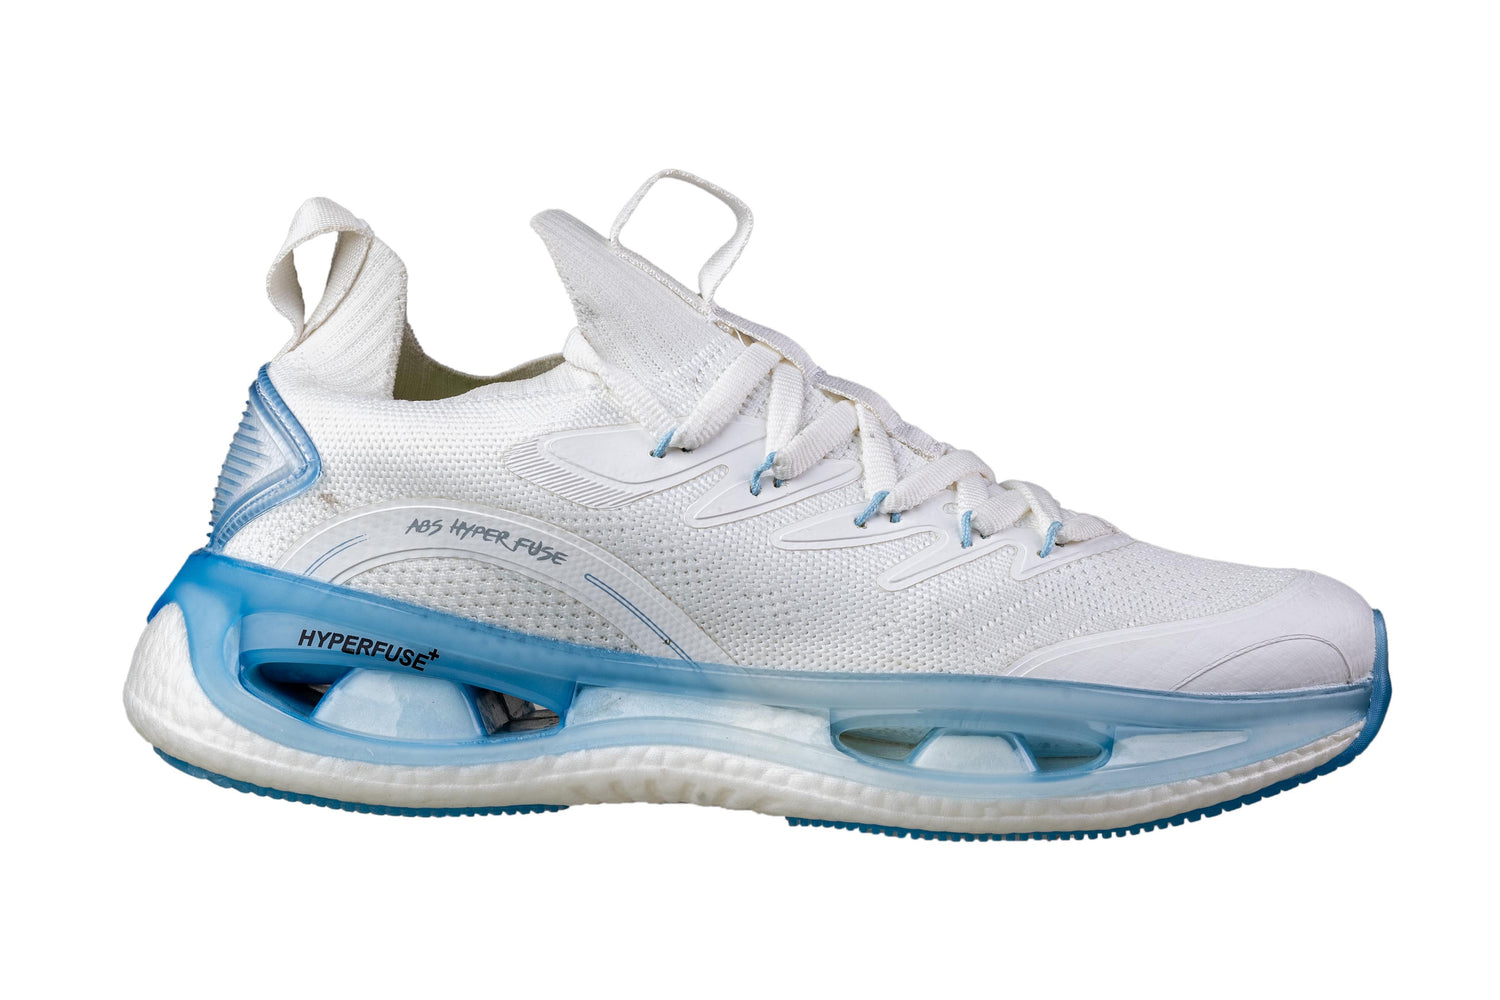 Abros Gents White / Ice Blue Sports Shoe